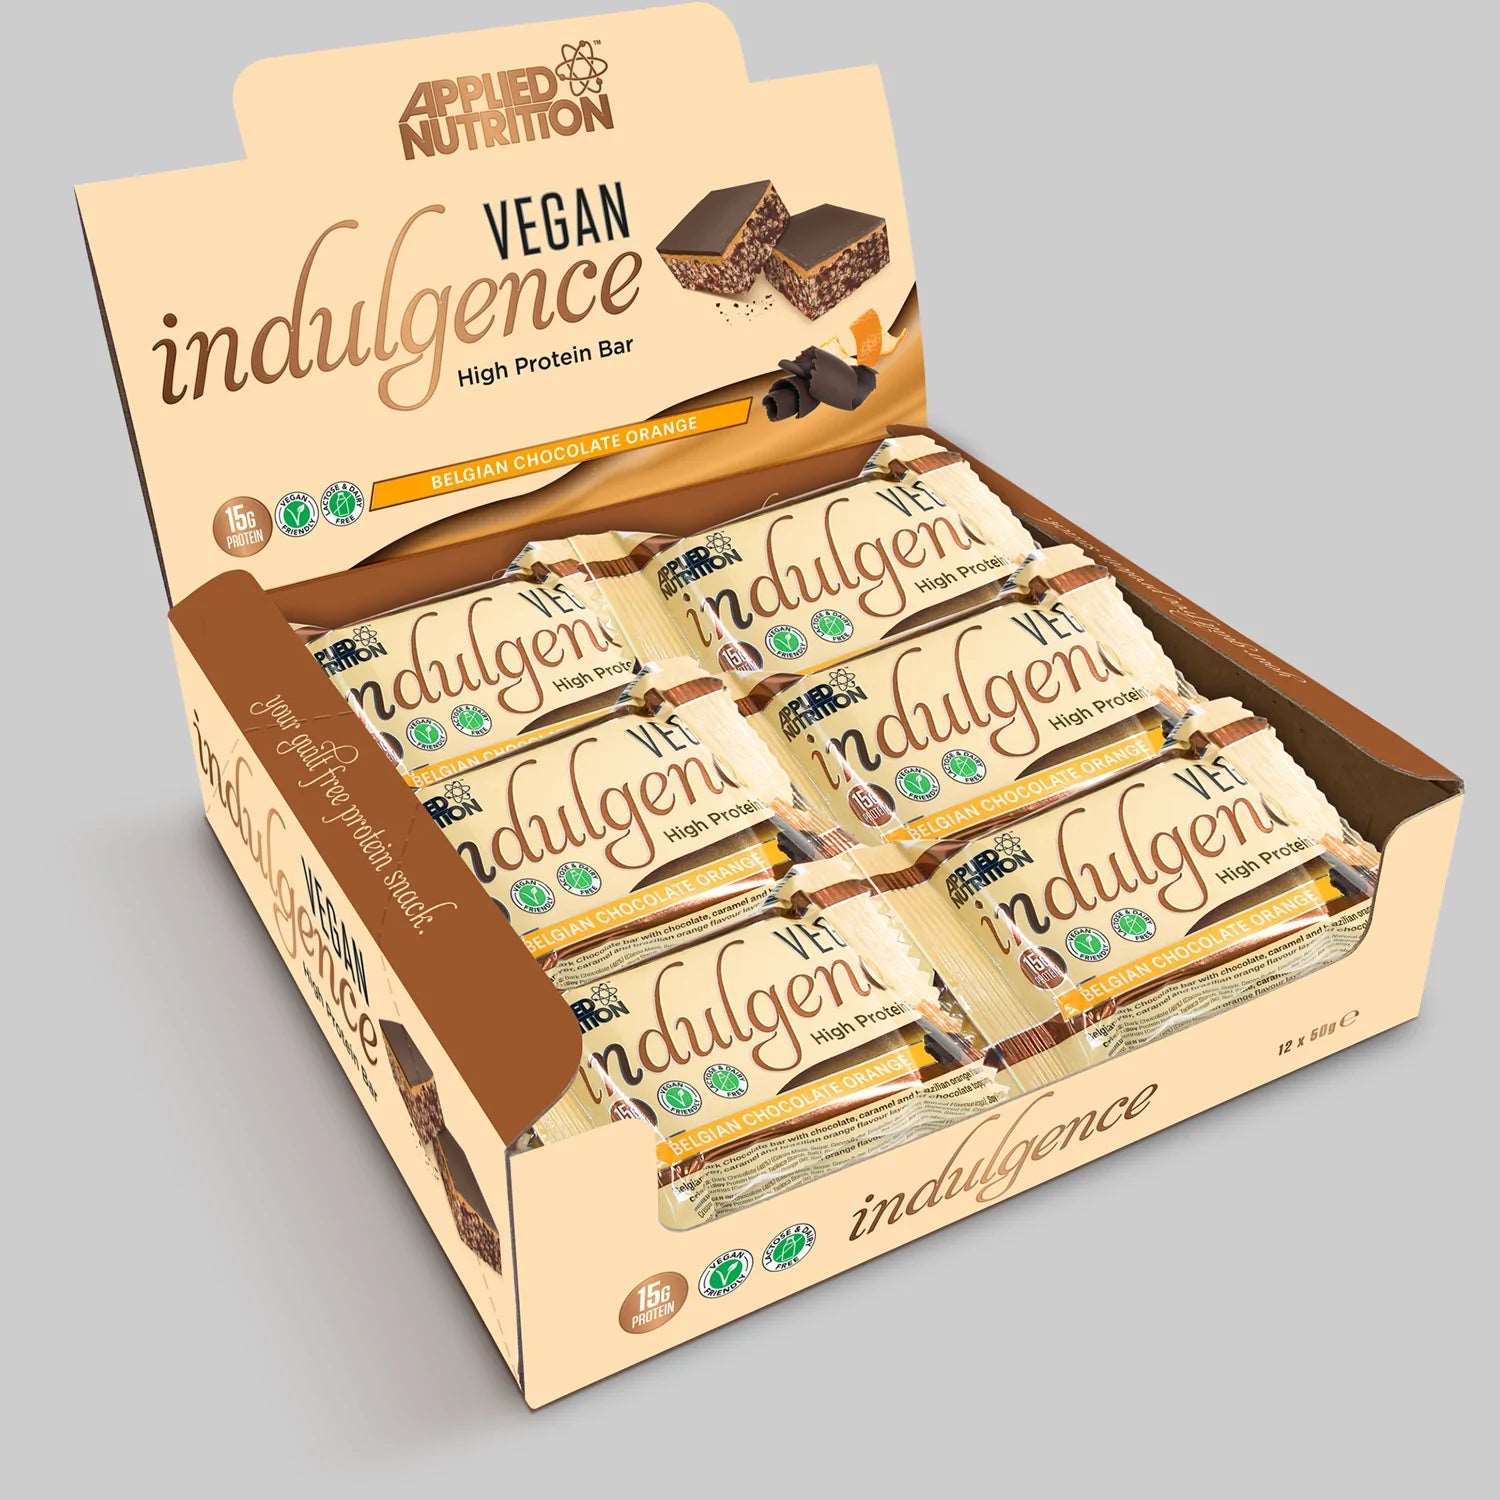 Applied Nutrition Vegan Indulgence Protein Bar (1 BOX of 12) copy-of-applied-nutrition-vegan-indulgence-bar-1-box-of-12 Protein Snacks Belgian Chocolate Orange BEST BY OCT 9/2022 Applied Nutrition